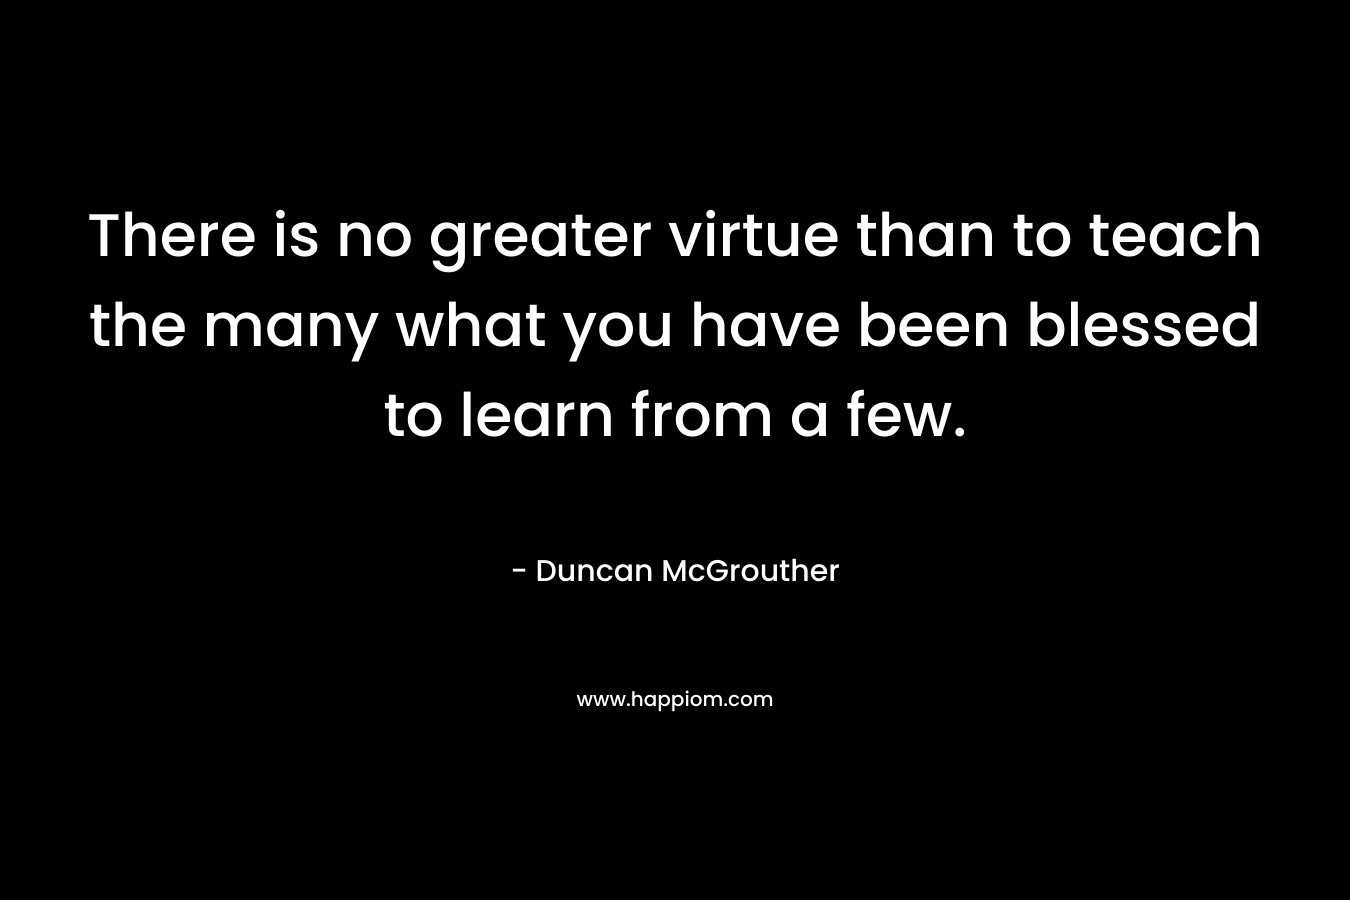 There is no greater virtue than to teach the many what you have been blessed to learn from a few.